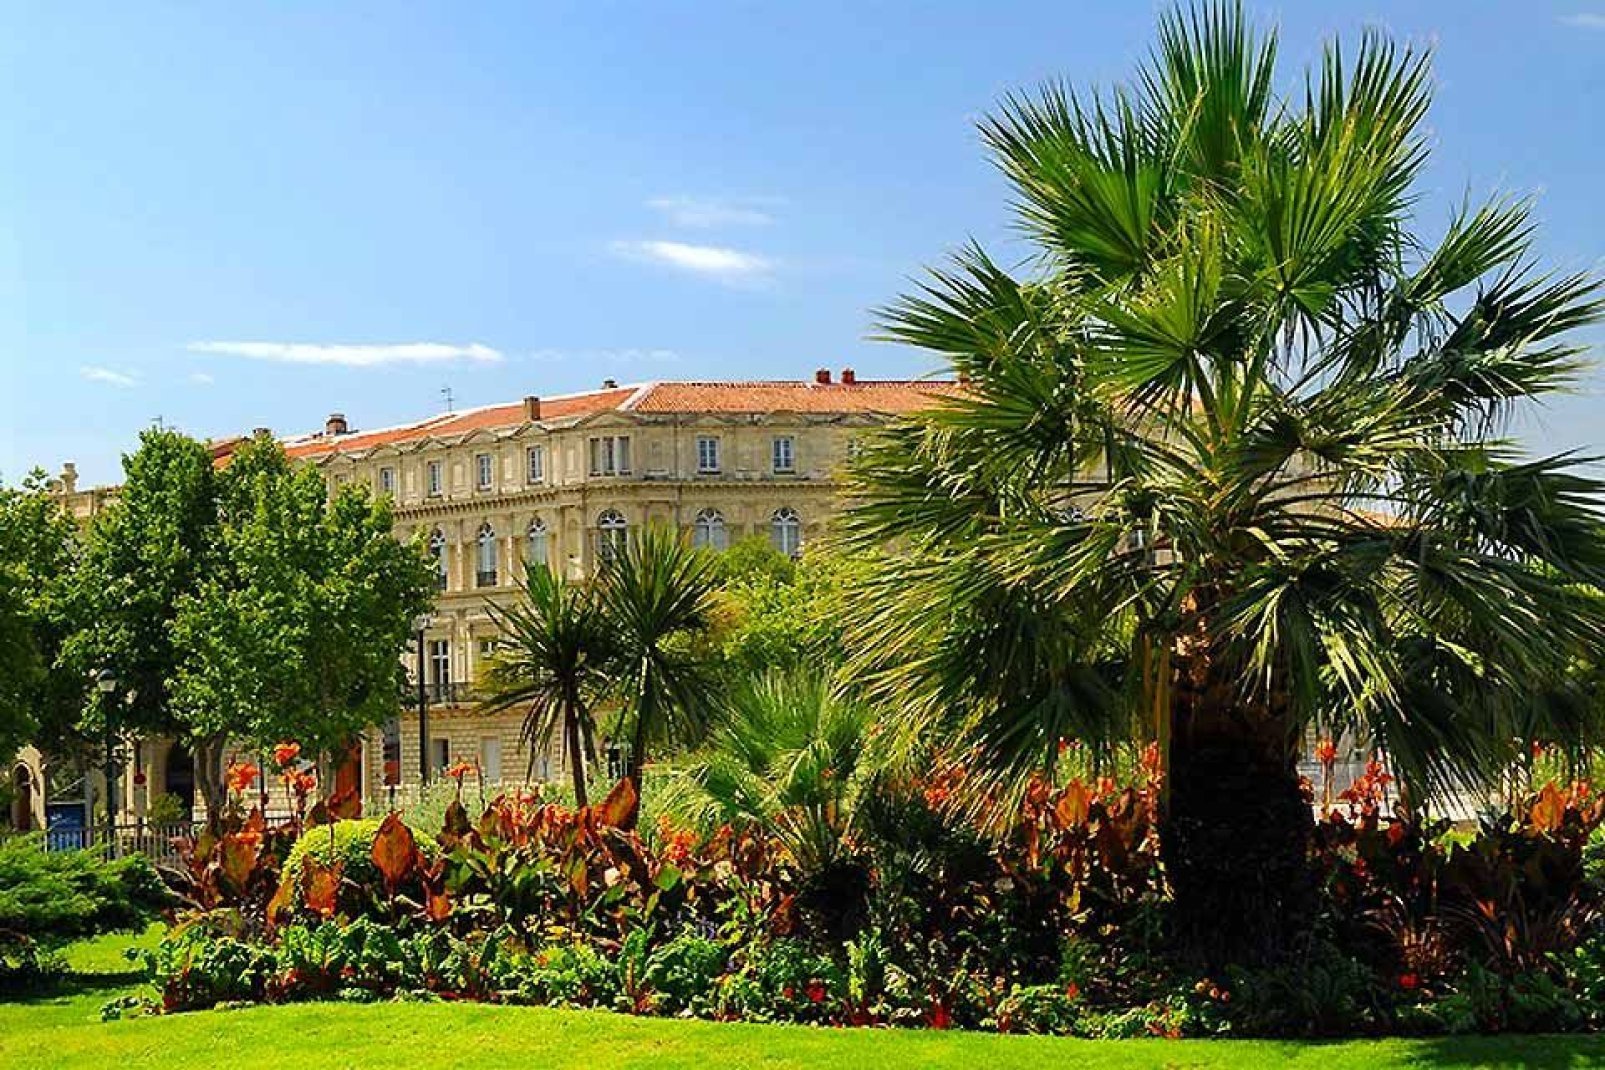 There are plenty of parks in Nîmes: Square des Courlis, Jardin Galilée, Domaine de la Bastide, and so on. They are all places to enjoy with family and friends.